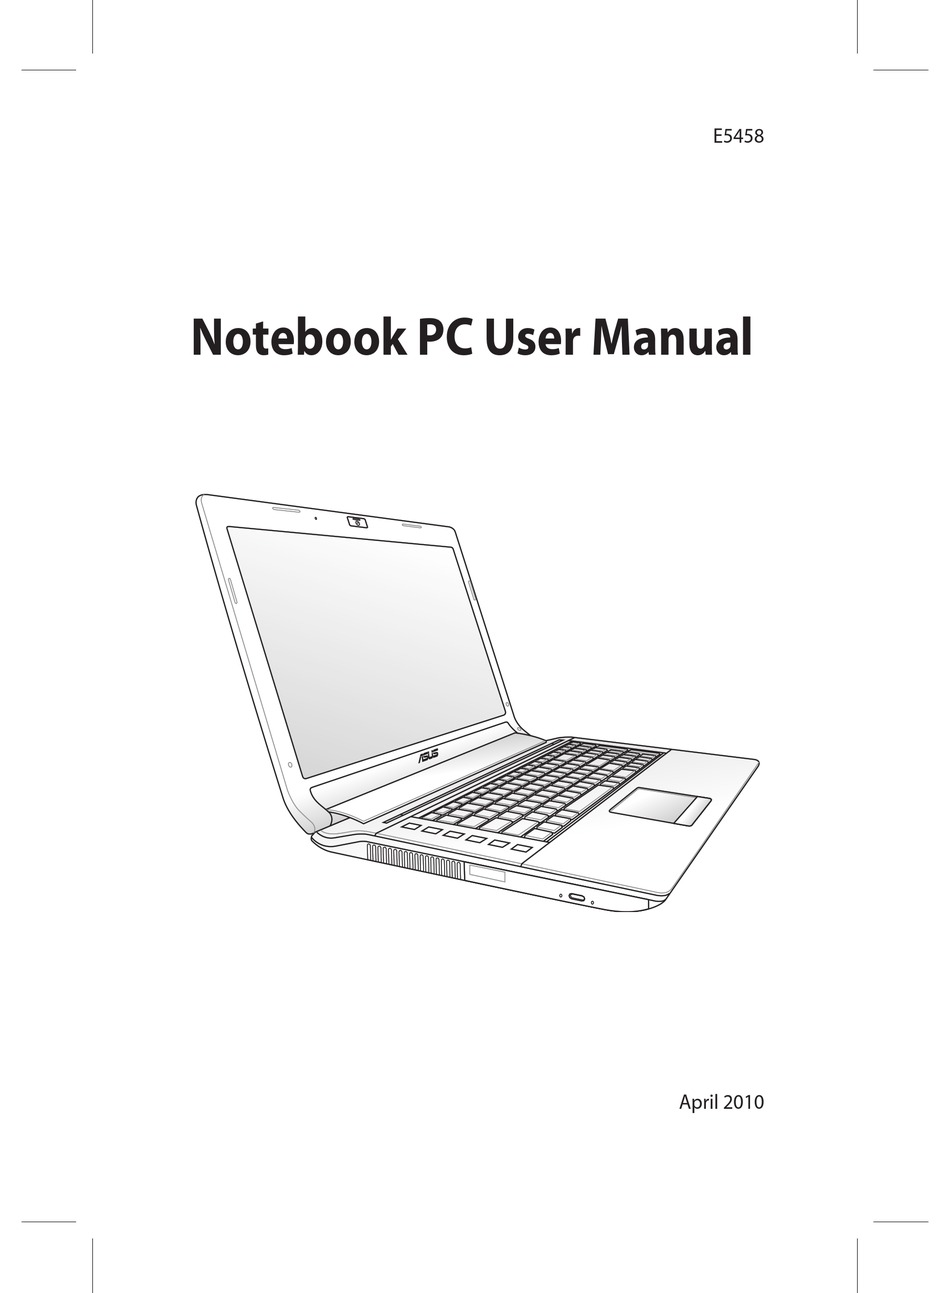 Asus laptop manual list of software packages for computers